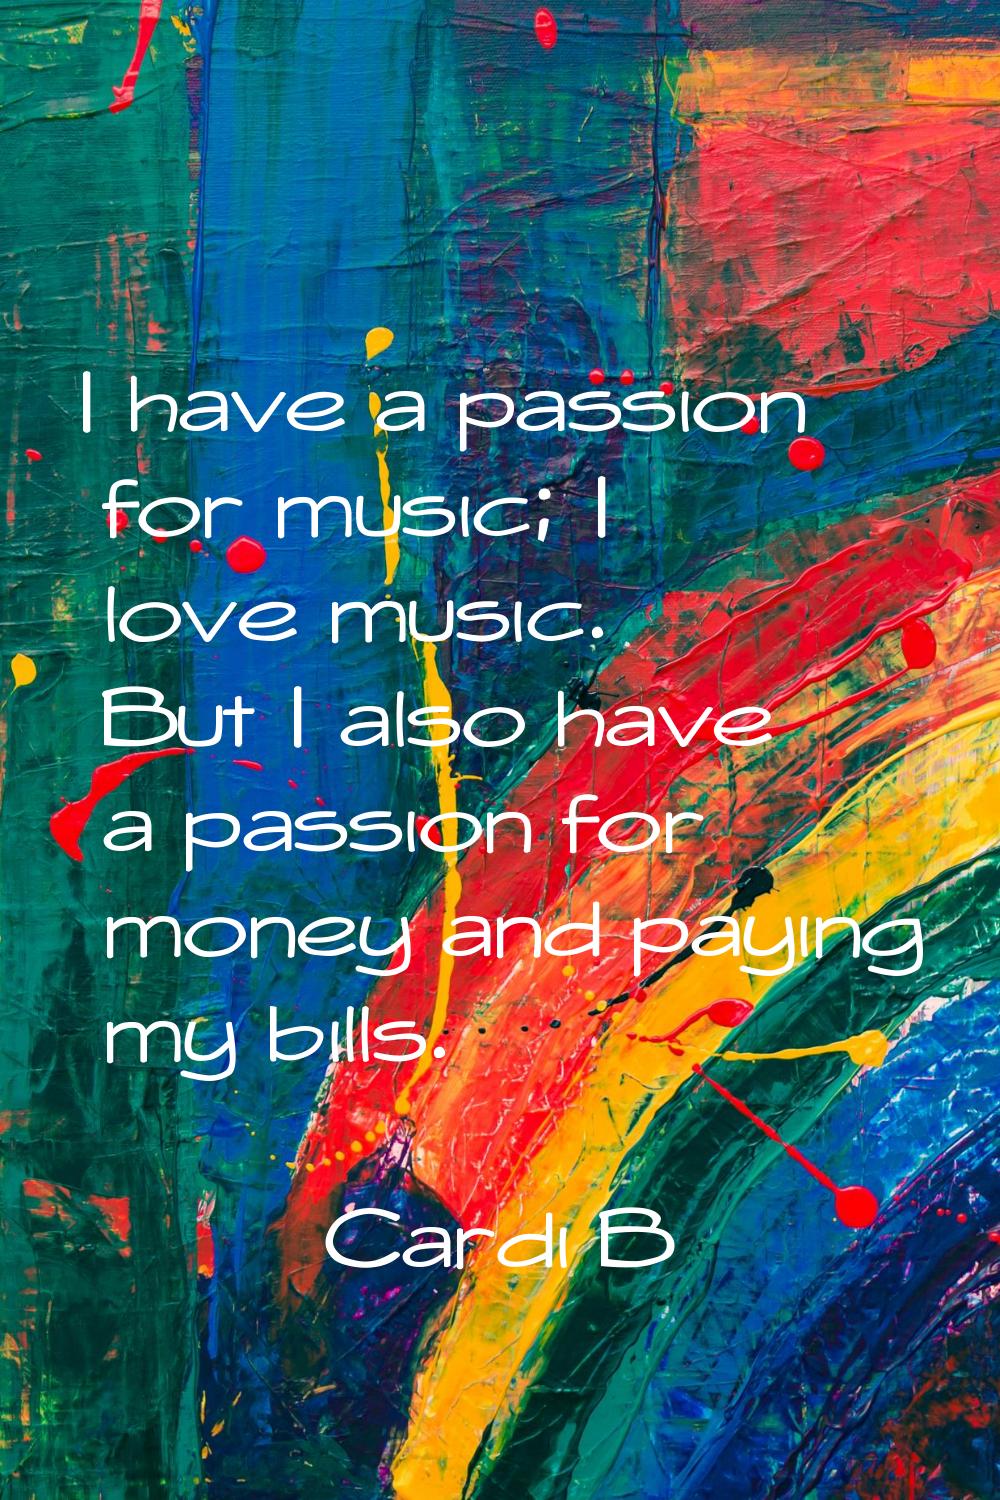 I have a passion for music; I love music. But I also have a passion for money and paying my bills.